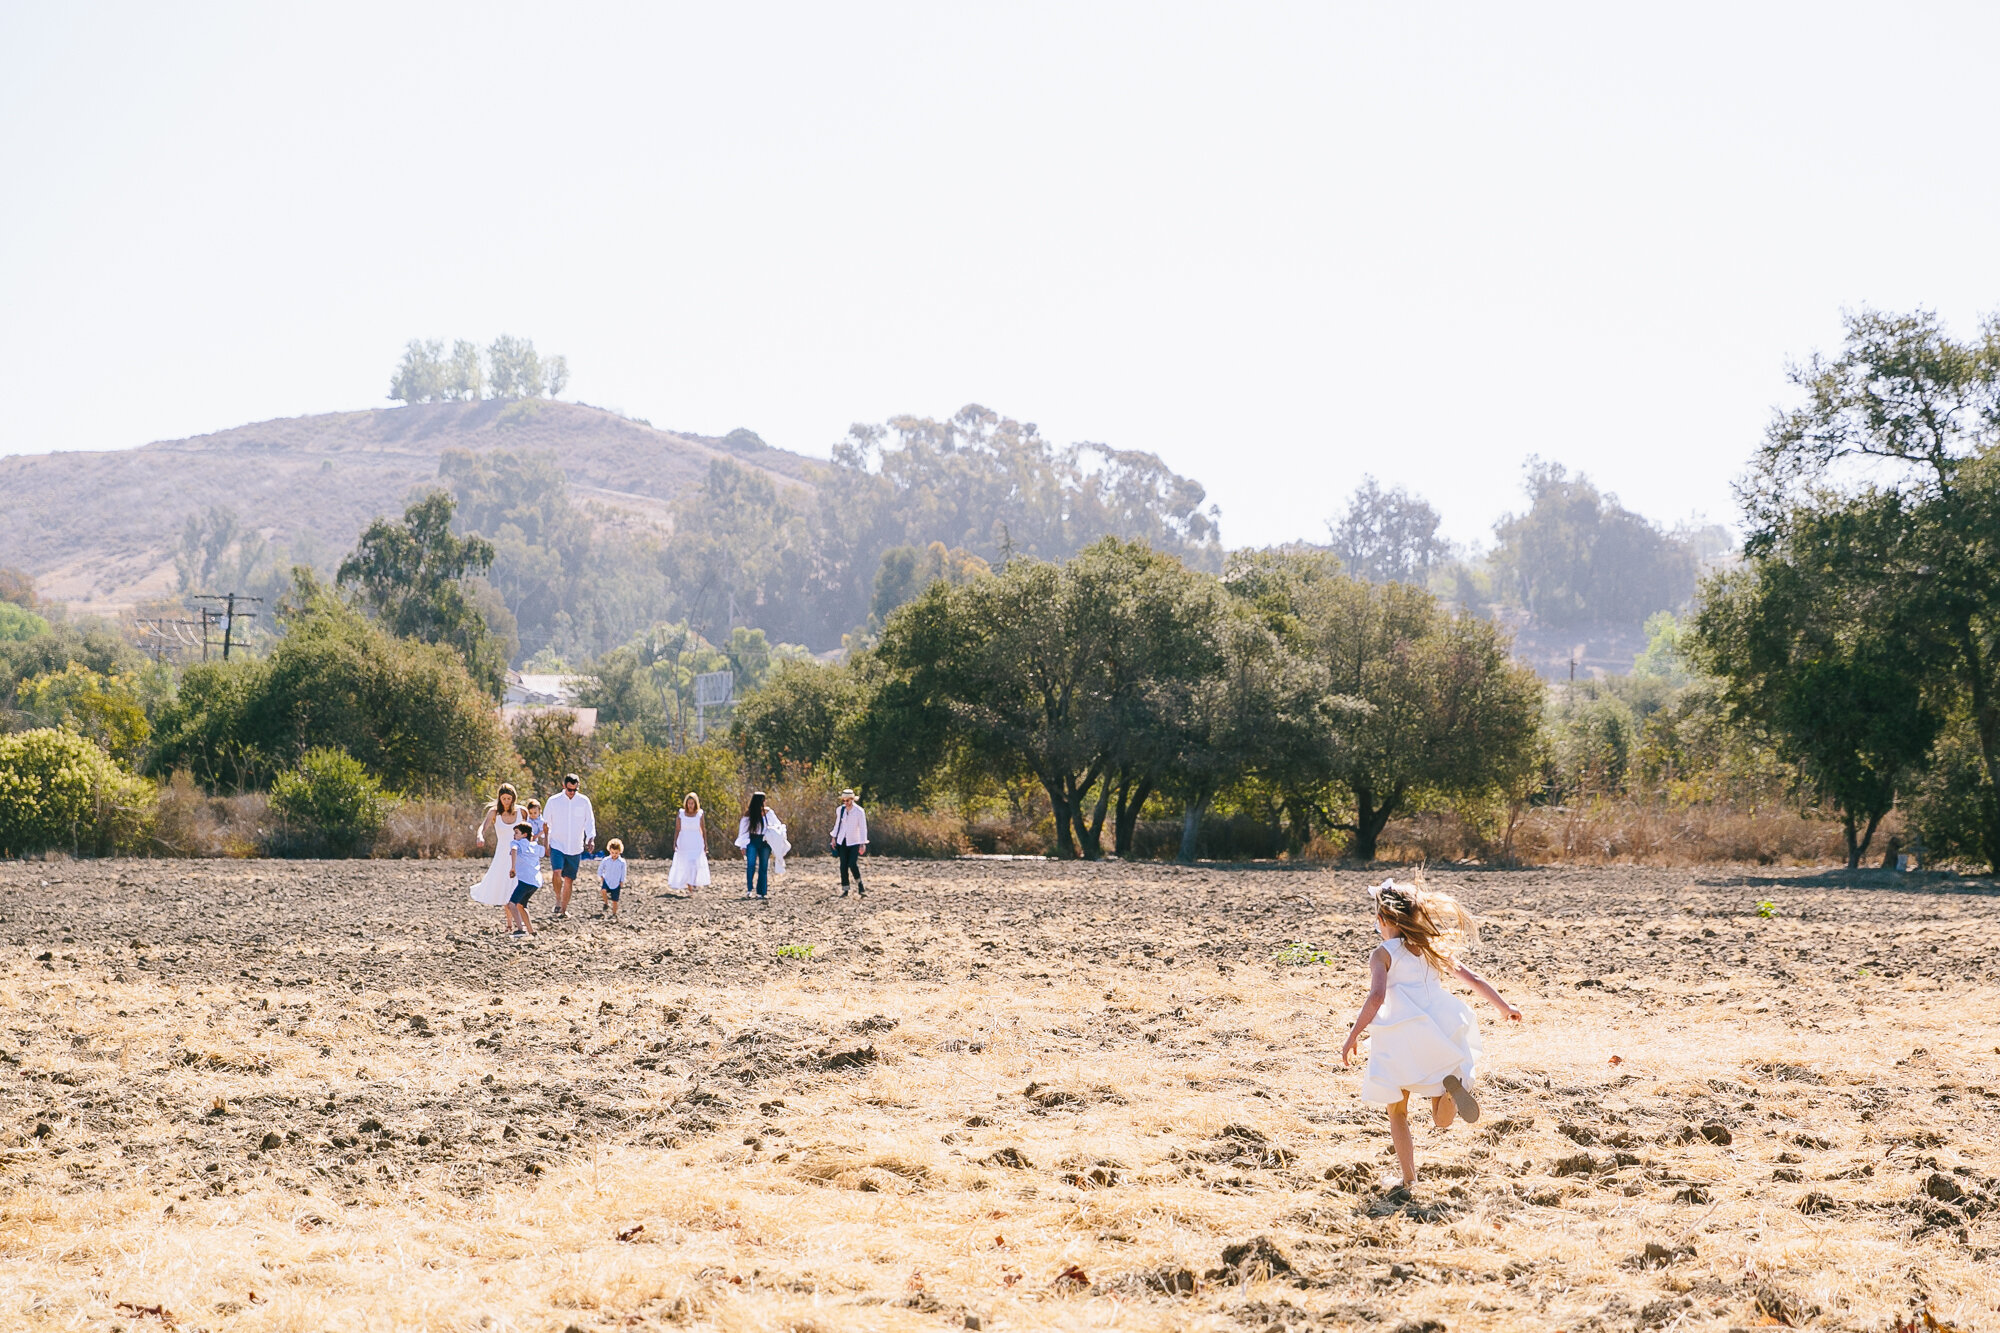 Los_Angeles_Family_Photography_Orange_County_Children_Babies_Field_Farm_Outdoors_Morning_Session_California_Girls_Boys_Kids_Photography-1163.jpg